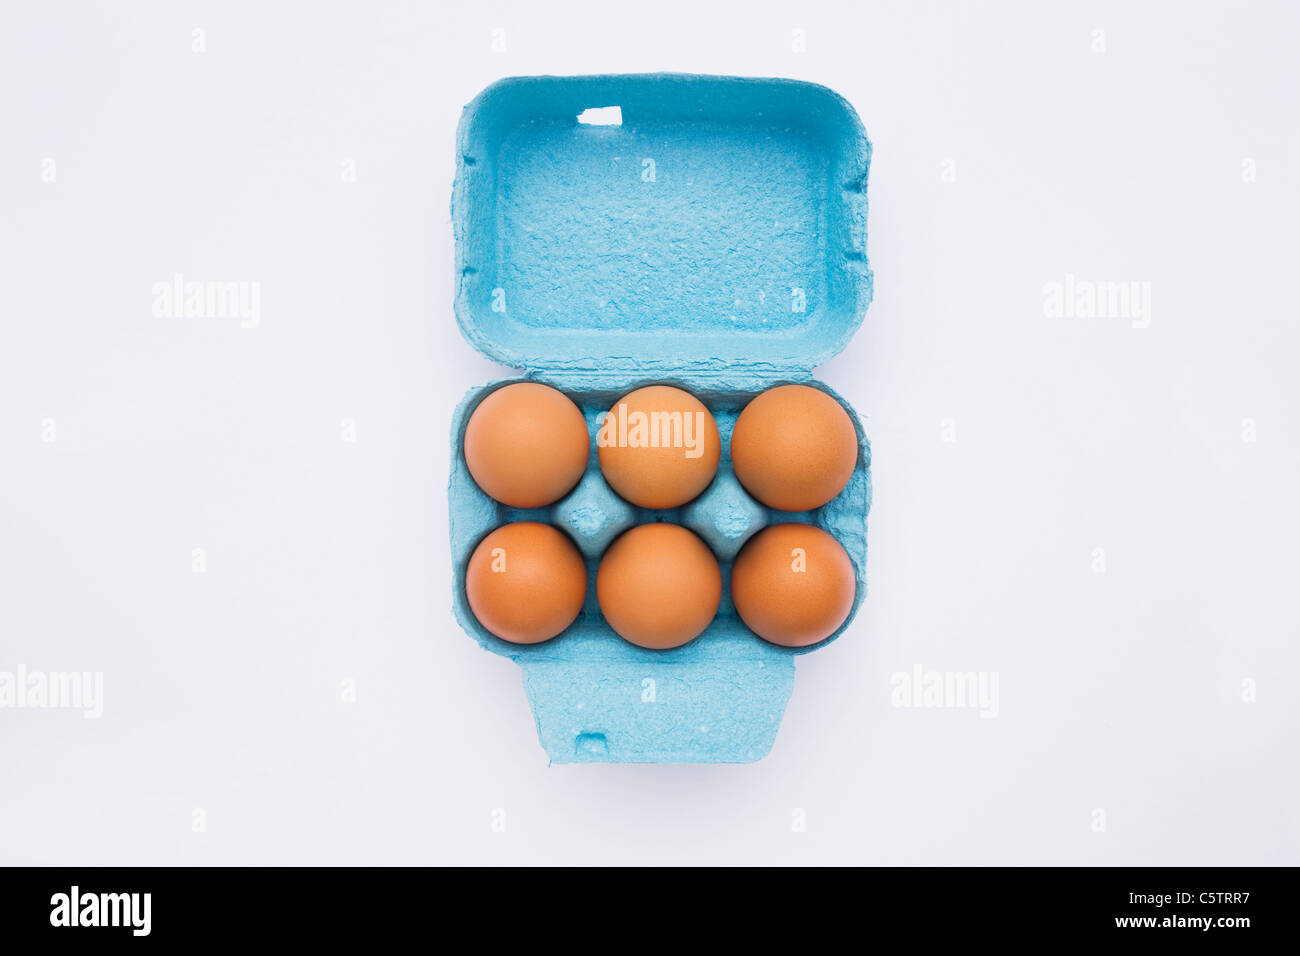 Eggs in box, elevated view Stock Photo